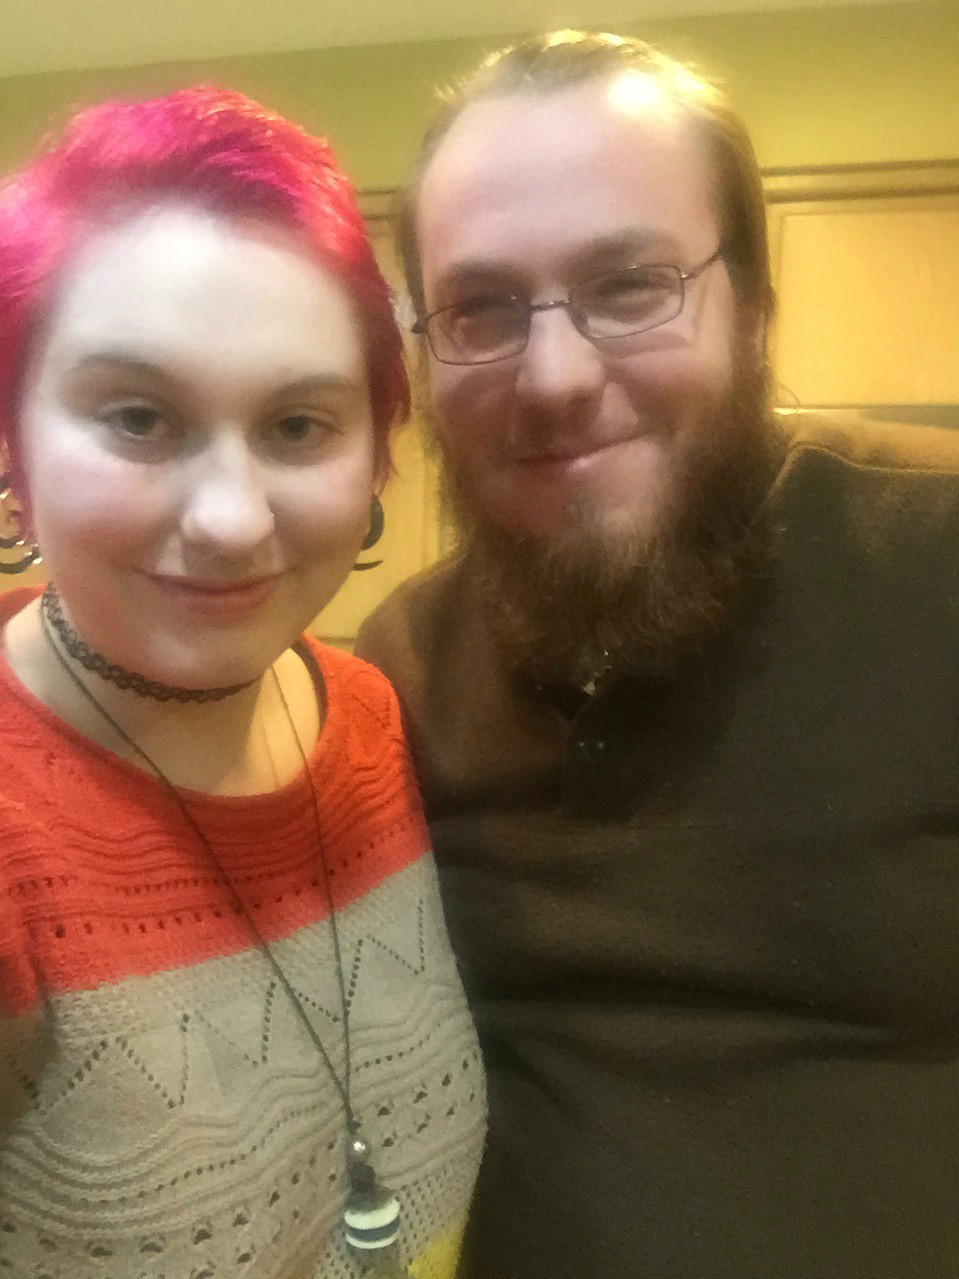 Kaety, a pale-skinned person with pink hair and wearing an orange and gray sweater, stands next to their fiance Matt, a pale-skinned man in a dark sweater with a brown beard.